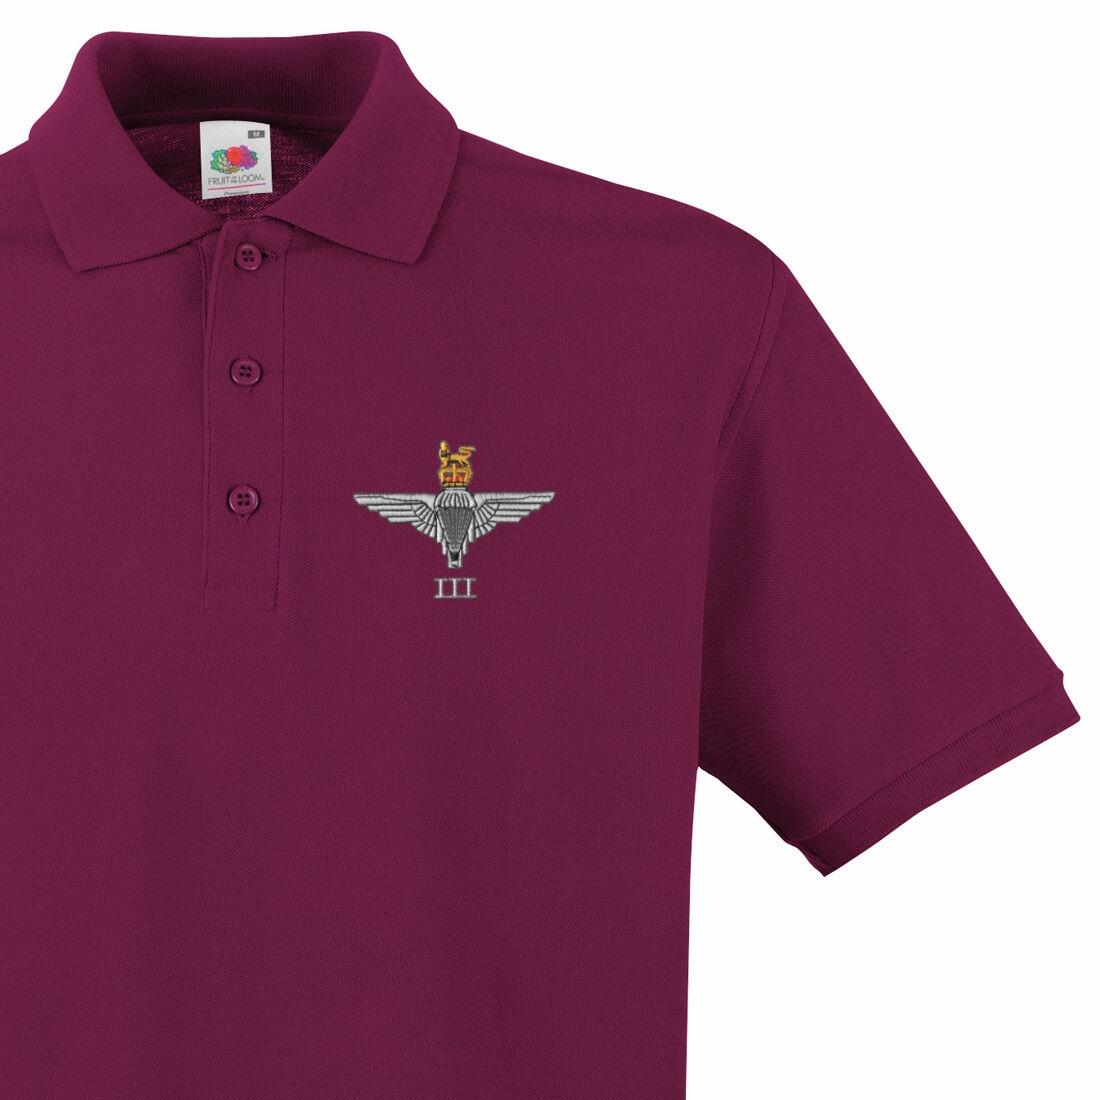 polo shirts number 3